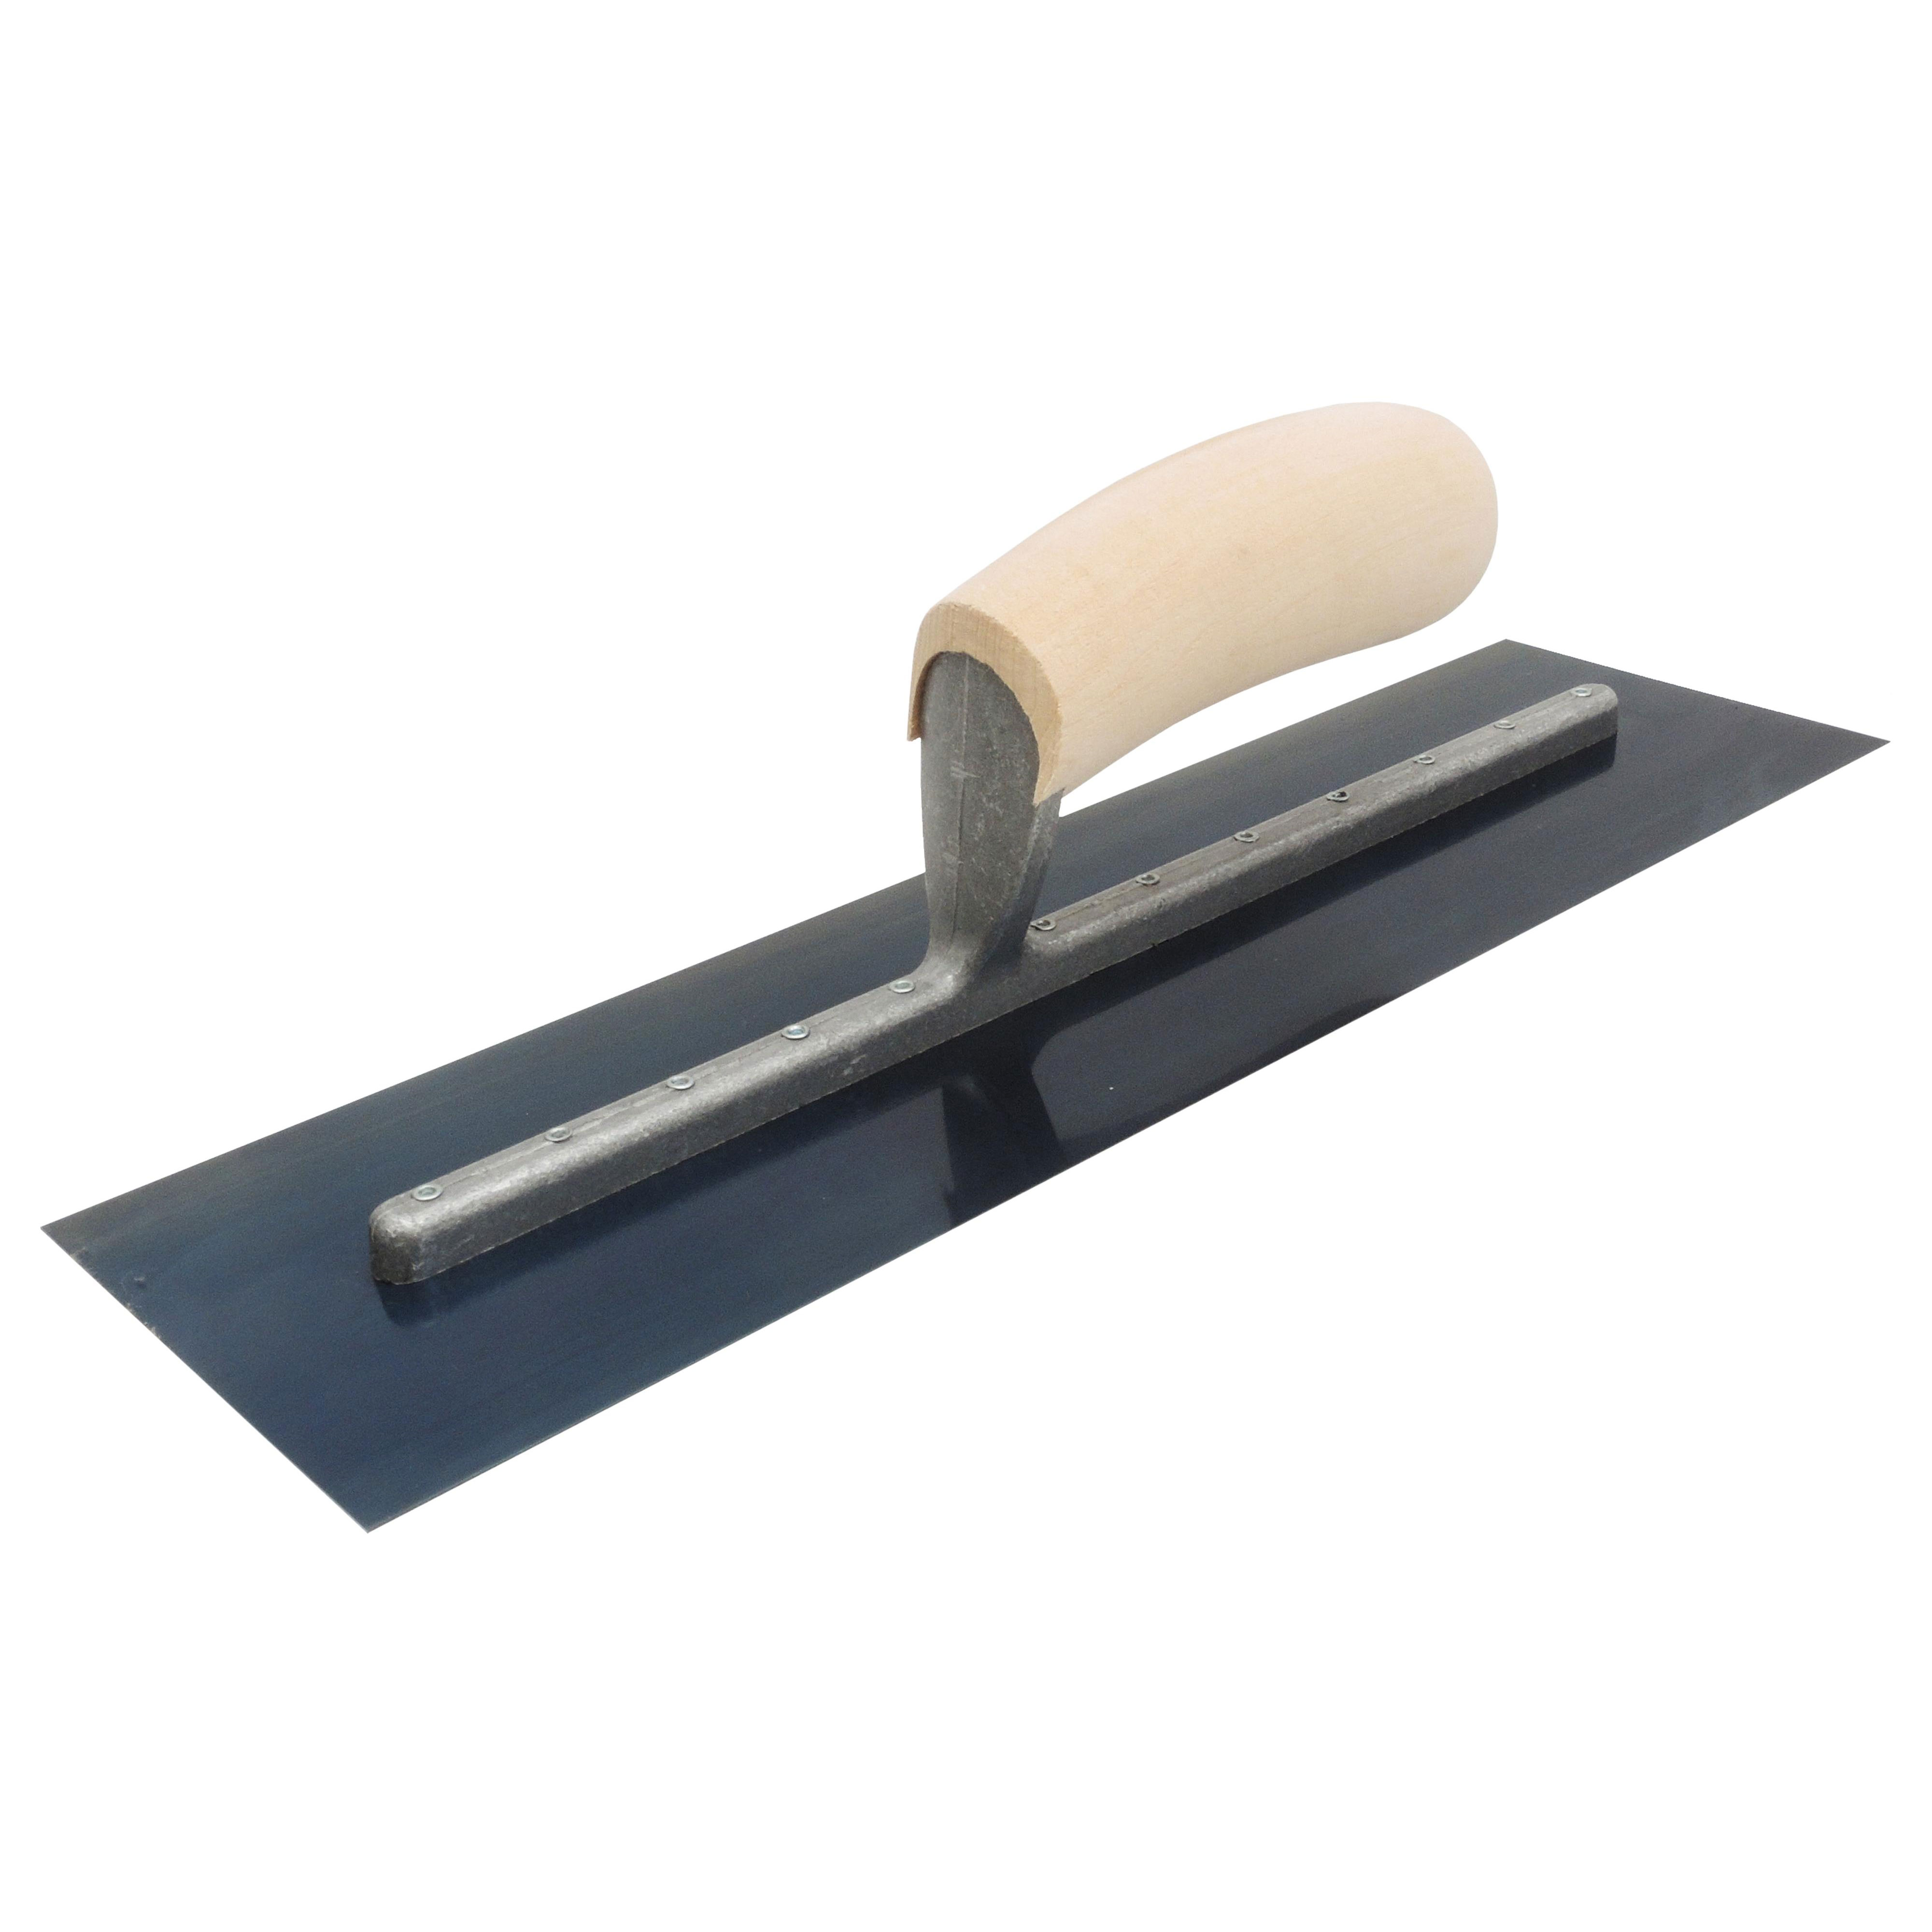 Marshalltown FT123B 12in x 3in Blue Steel Finishing Trowel with Wood Handle FT123B